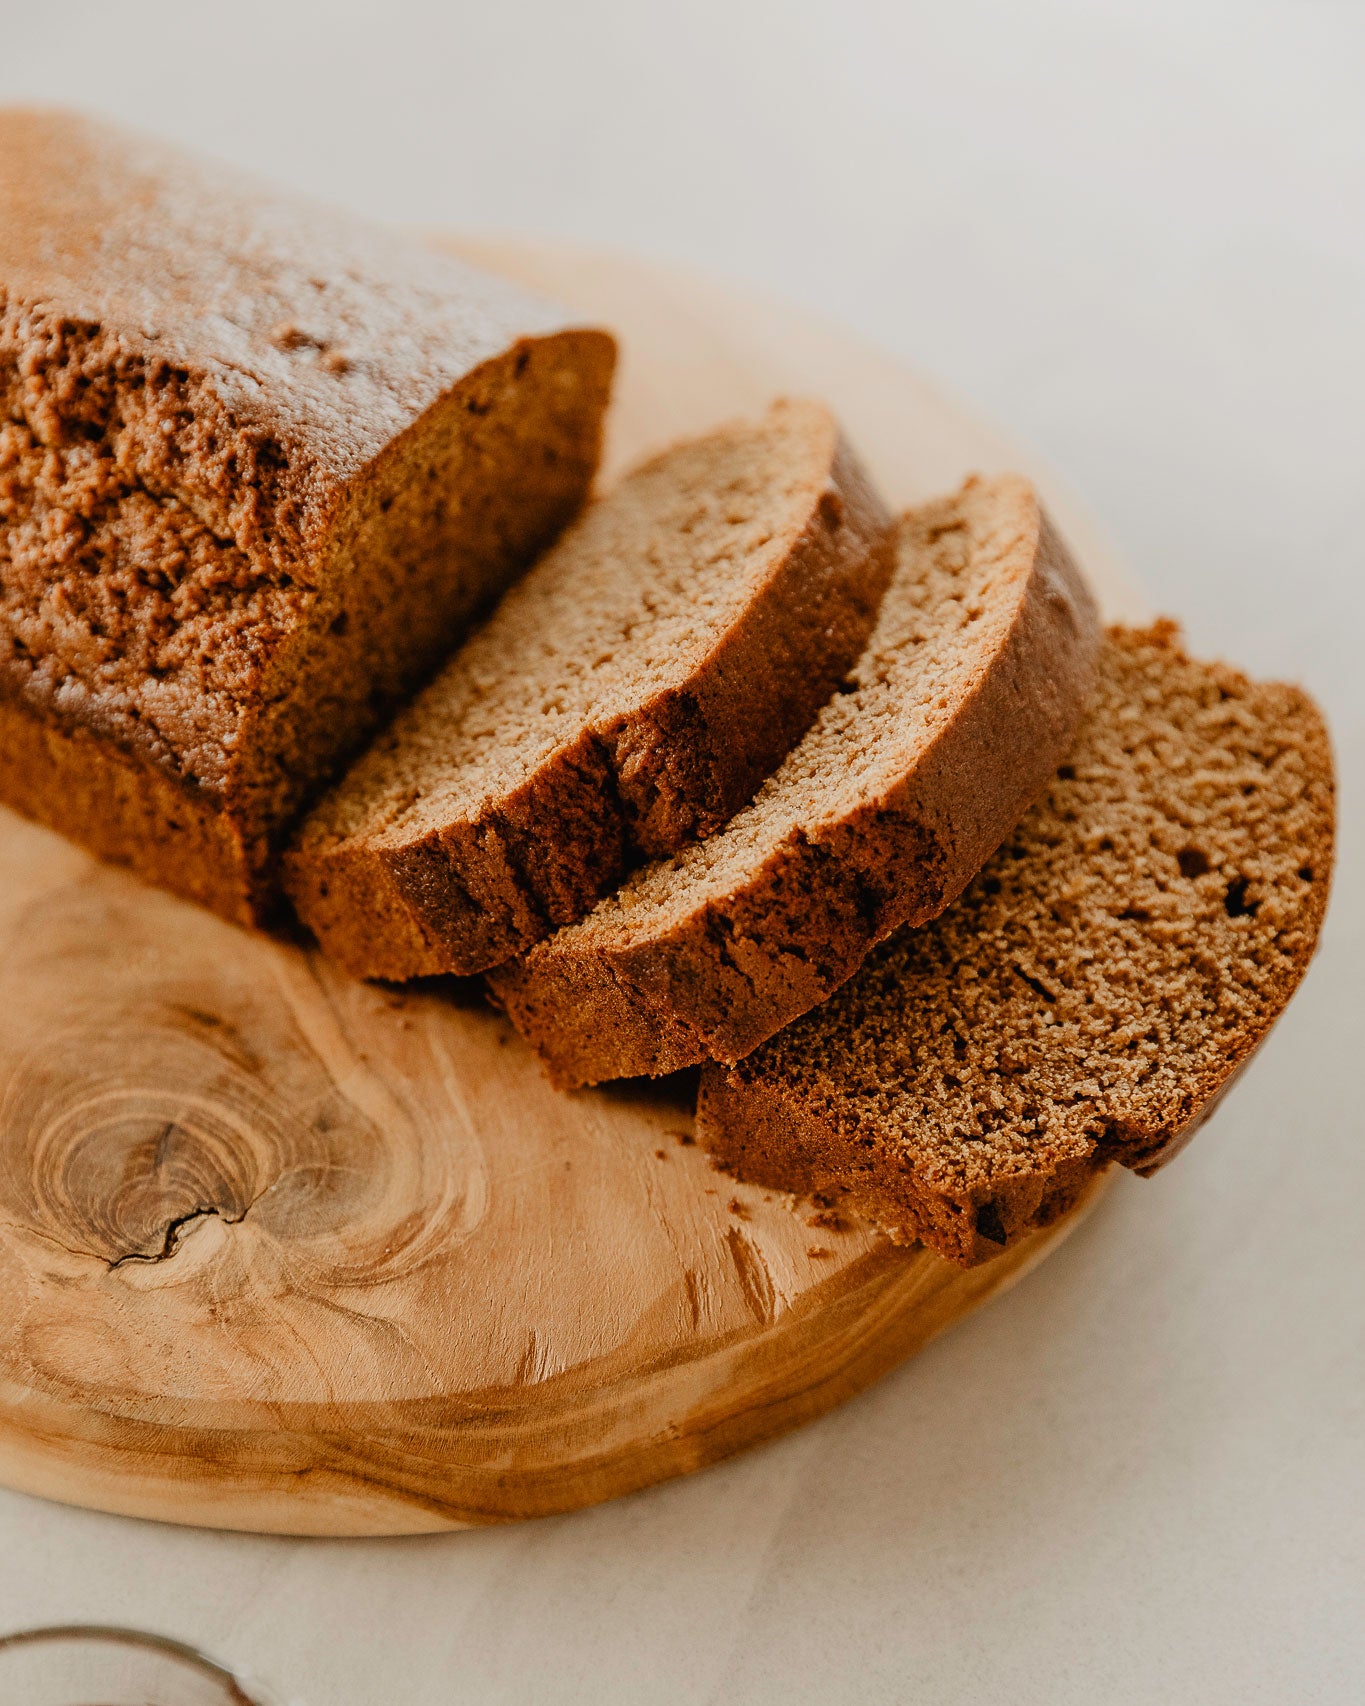 The Best Old Fashioned Gingerbread Loaf